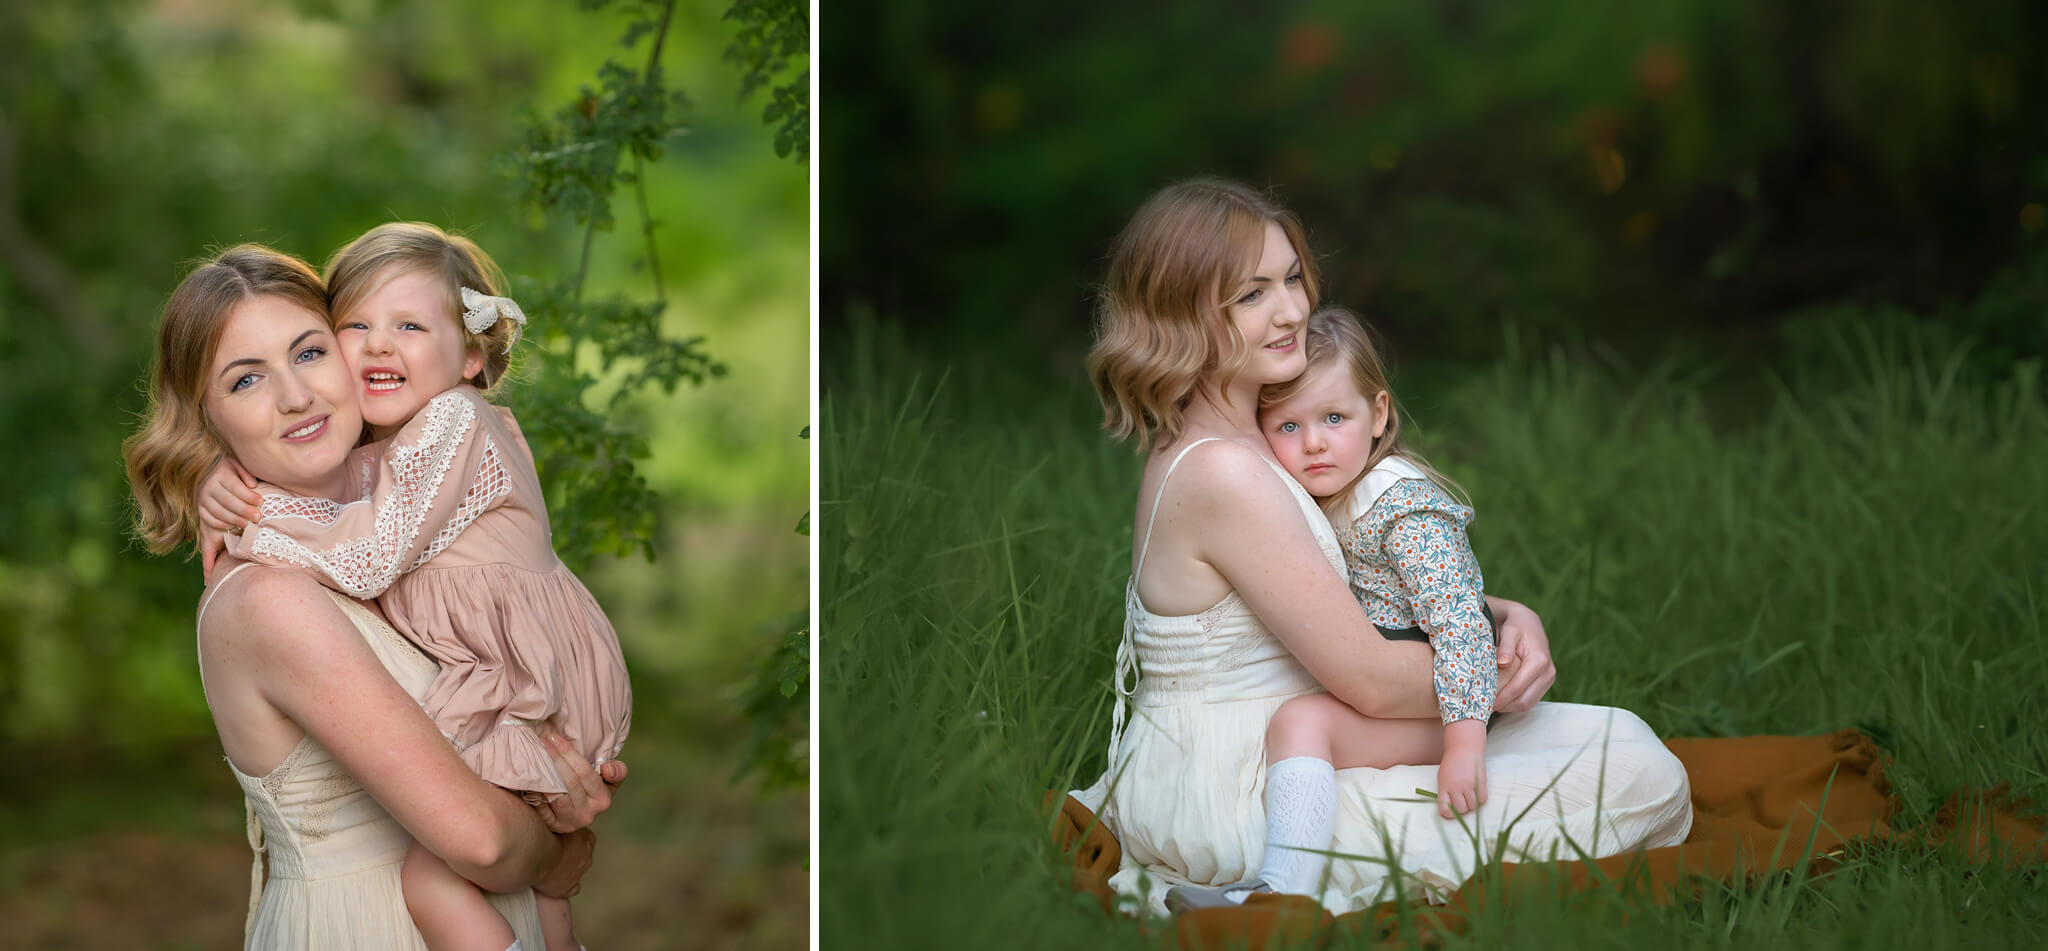 Perth mum with her 4 year old daughter in a green outdoor location during family photoshoot